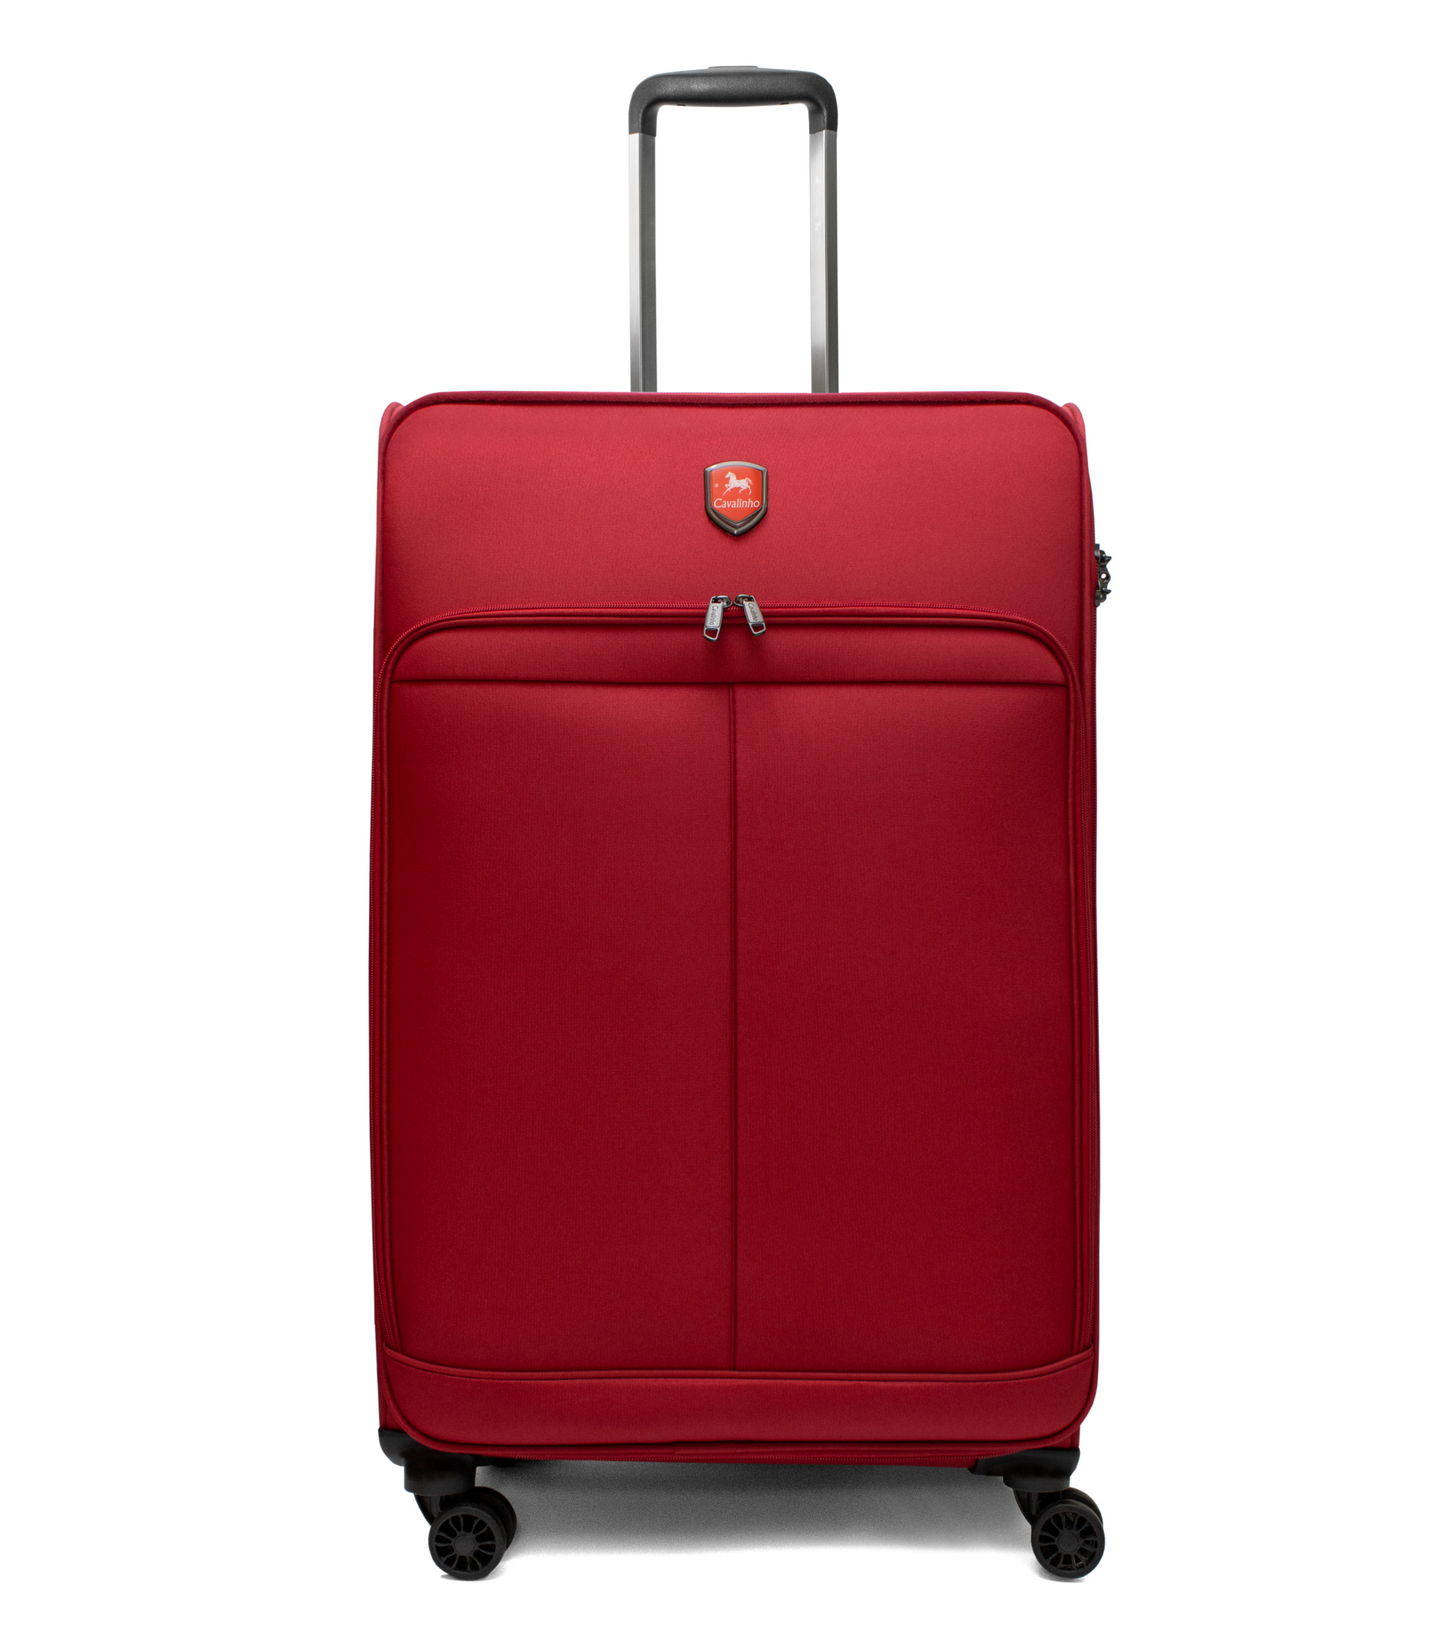 Cavalinho Check-in Softside Luggage (24" or 28") - 28 inch Red - 68020003.04.28_1